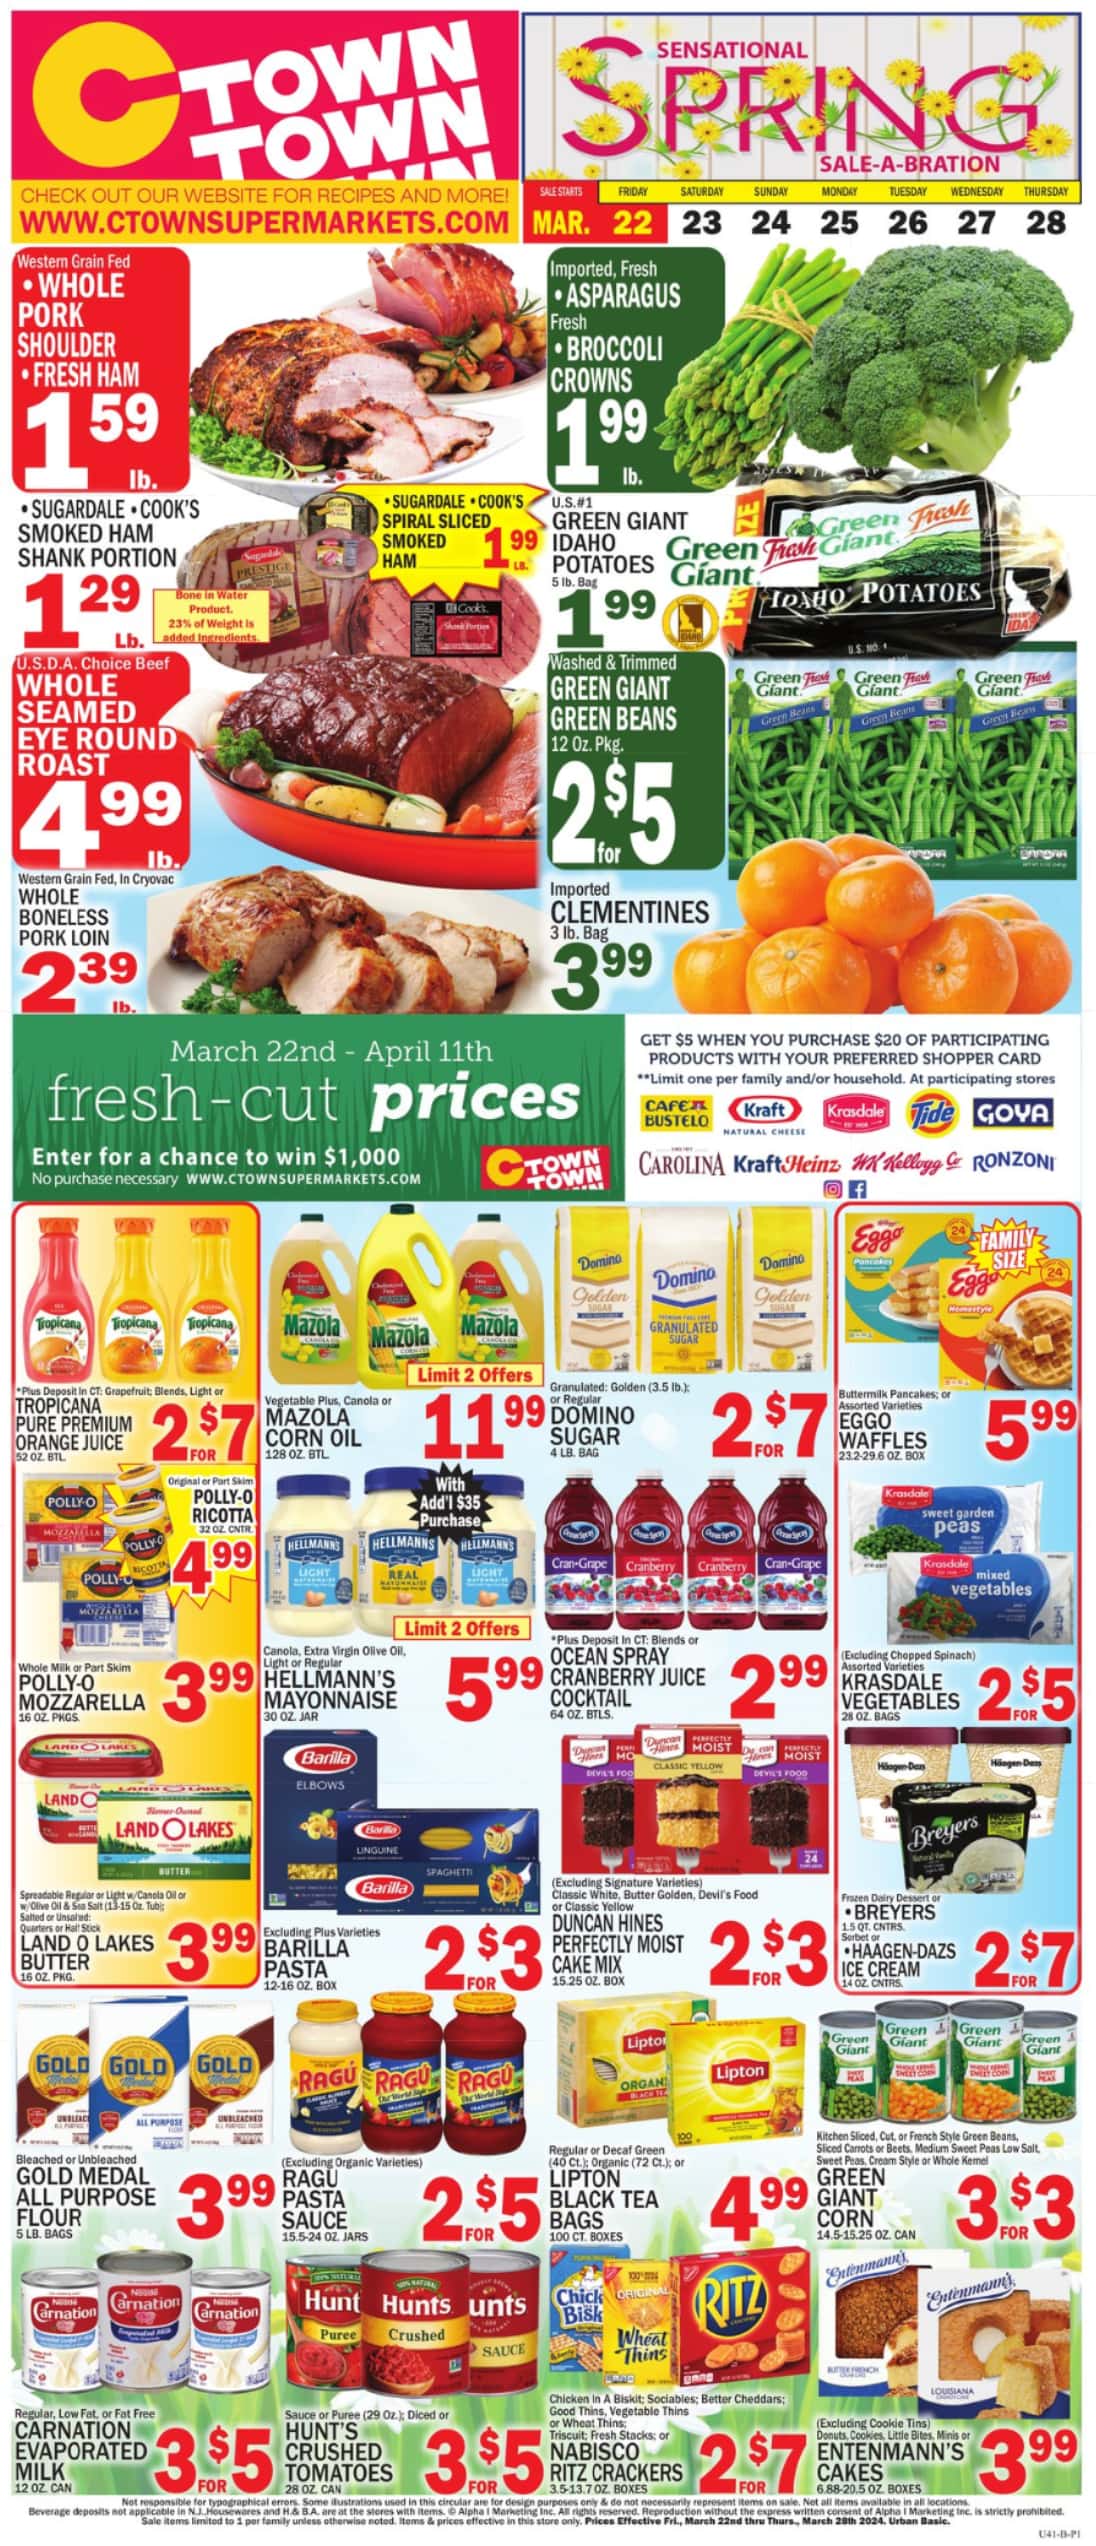 Ctown_weekly_ad_032224_01